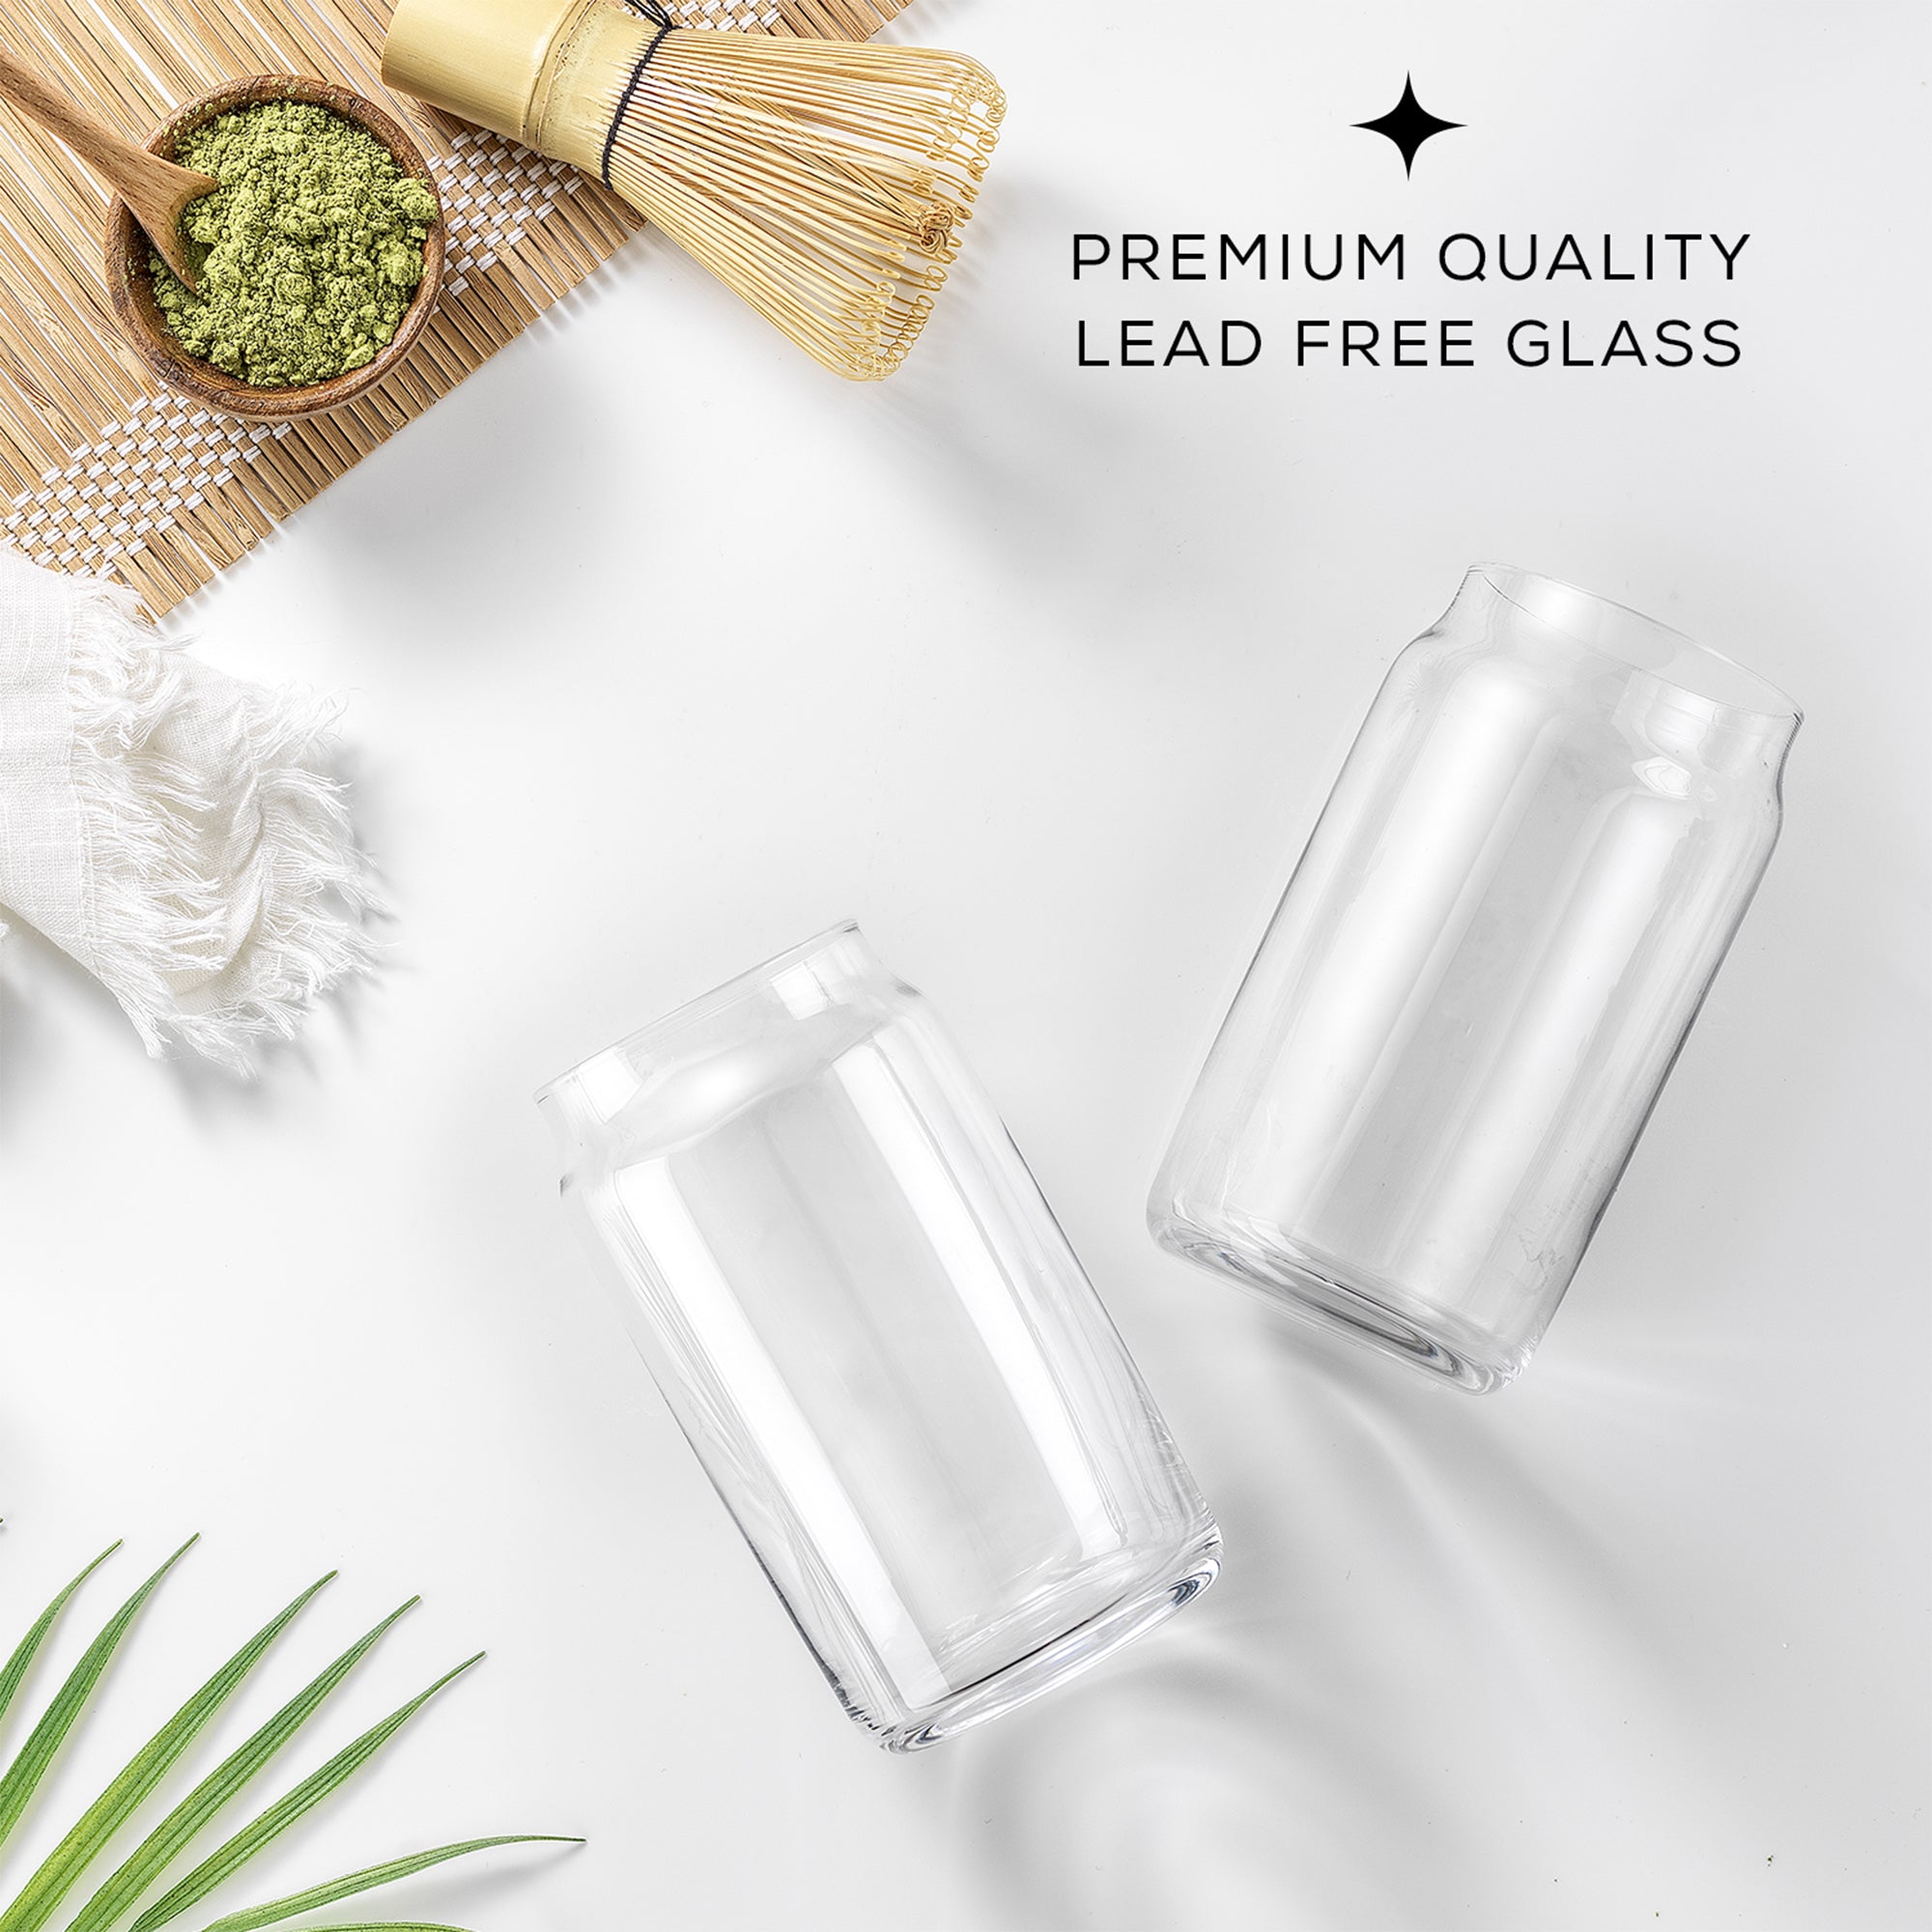 Two JoyJolt Classic Can Shape Tumbler Drinking Glass Cups sit on a white table next to a bowl of matcha powder and a whisk. The text on the image reads, "Premium Quality Lead Free Glass."